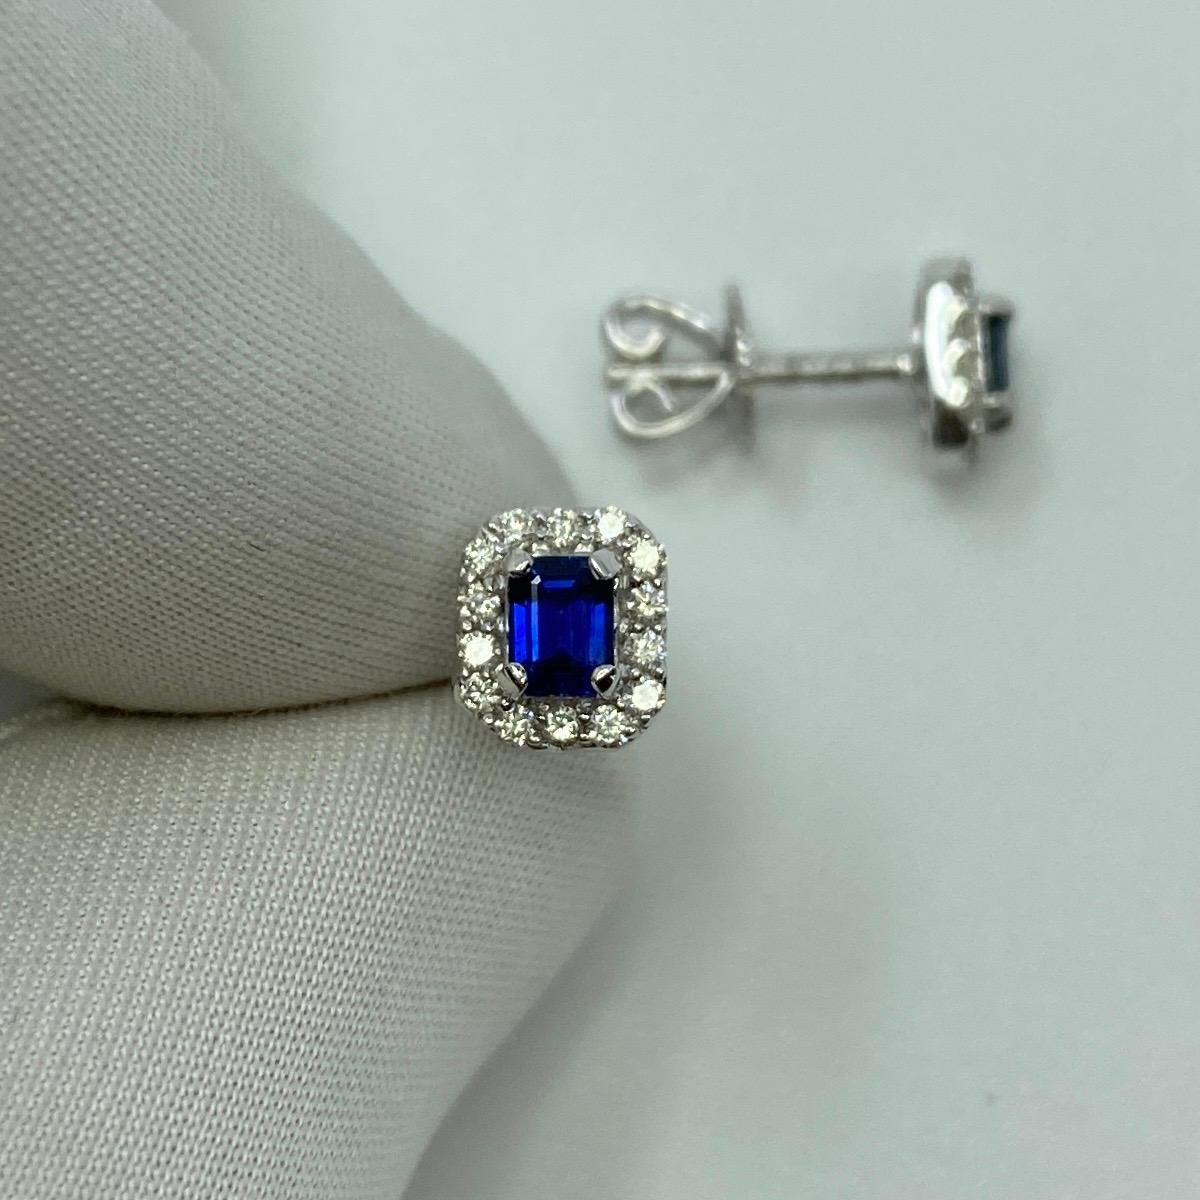 Ceylon Blue Sapphire & Diamond 18k White Gold Earring Halo Studs.

Fine blue 0.65tcw Ceylon sapphires with an excellent emerald cut and top clarity. Set in beautiful 18k white gold halo earring studs. Set with a total of 28 diamonds (0.21tcw) with